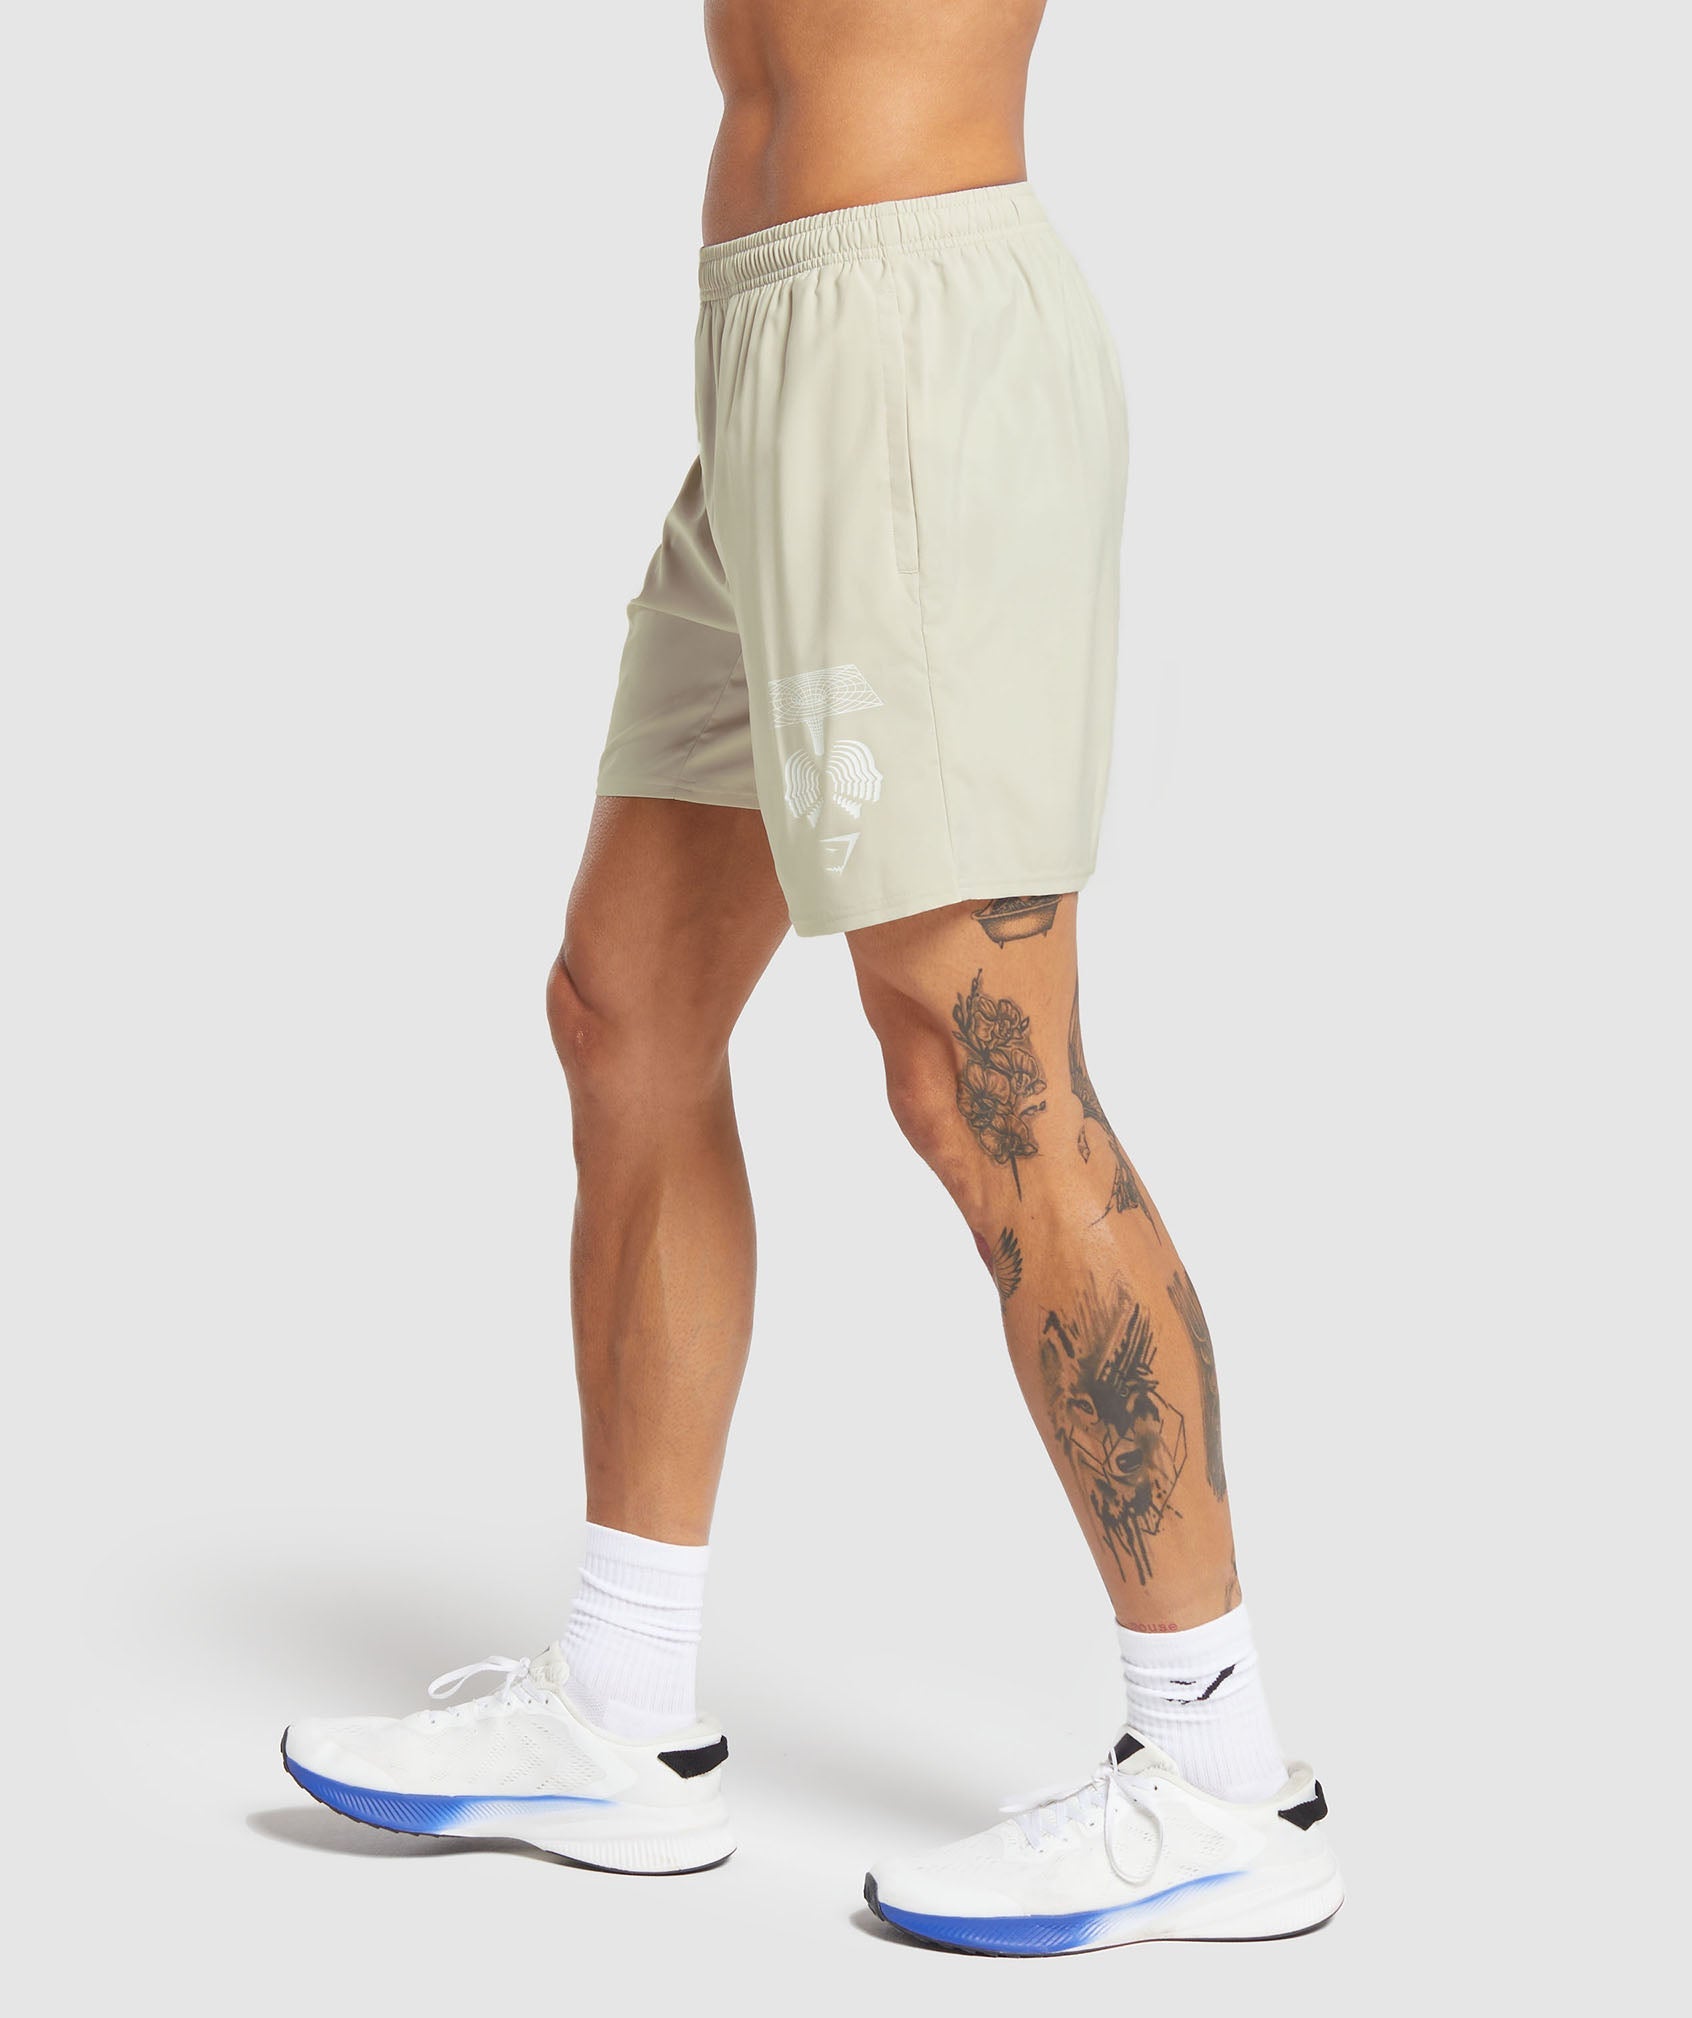 Hybrid Wellness 7" Shorts in Pebble Grey - view 3